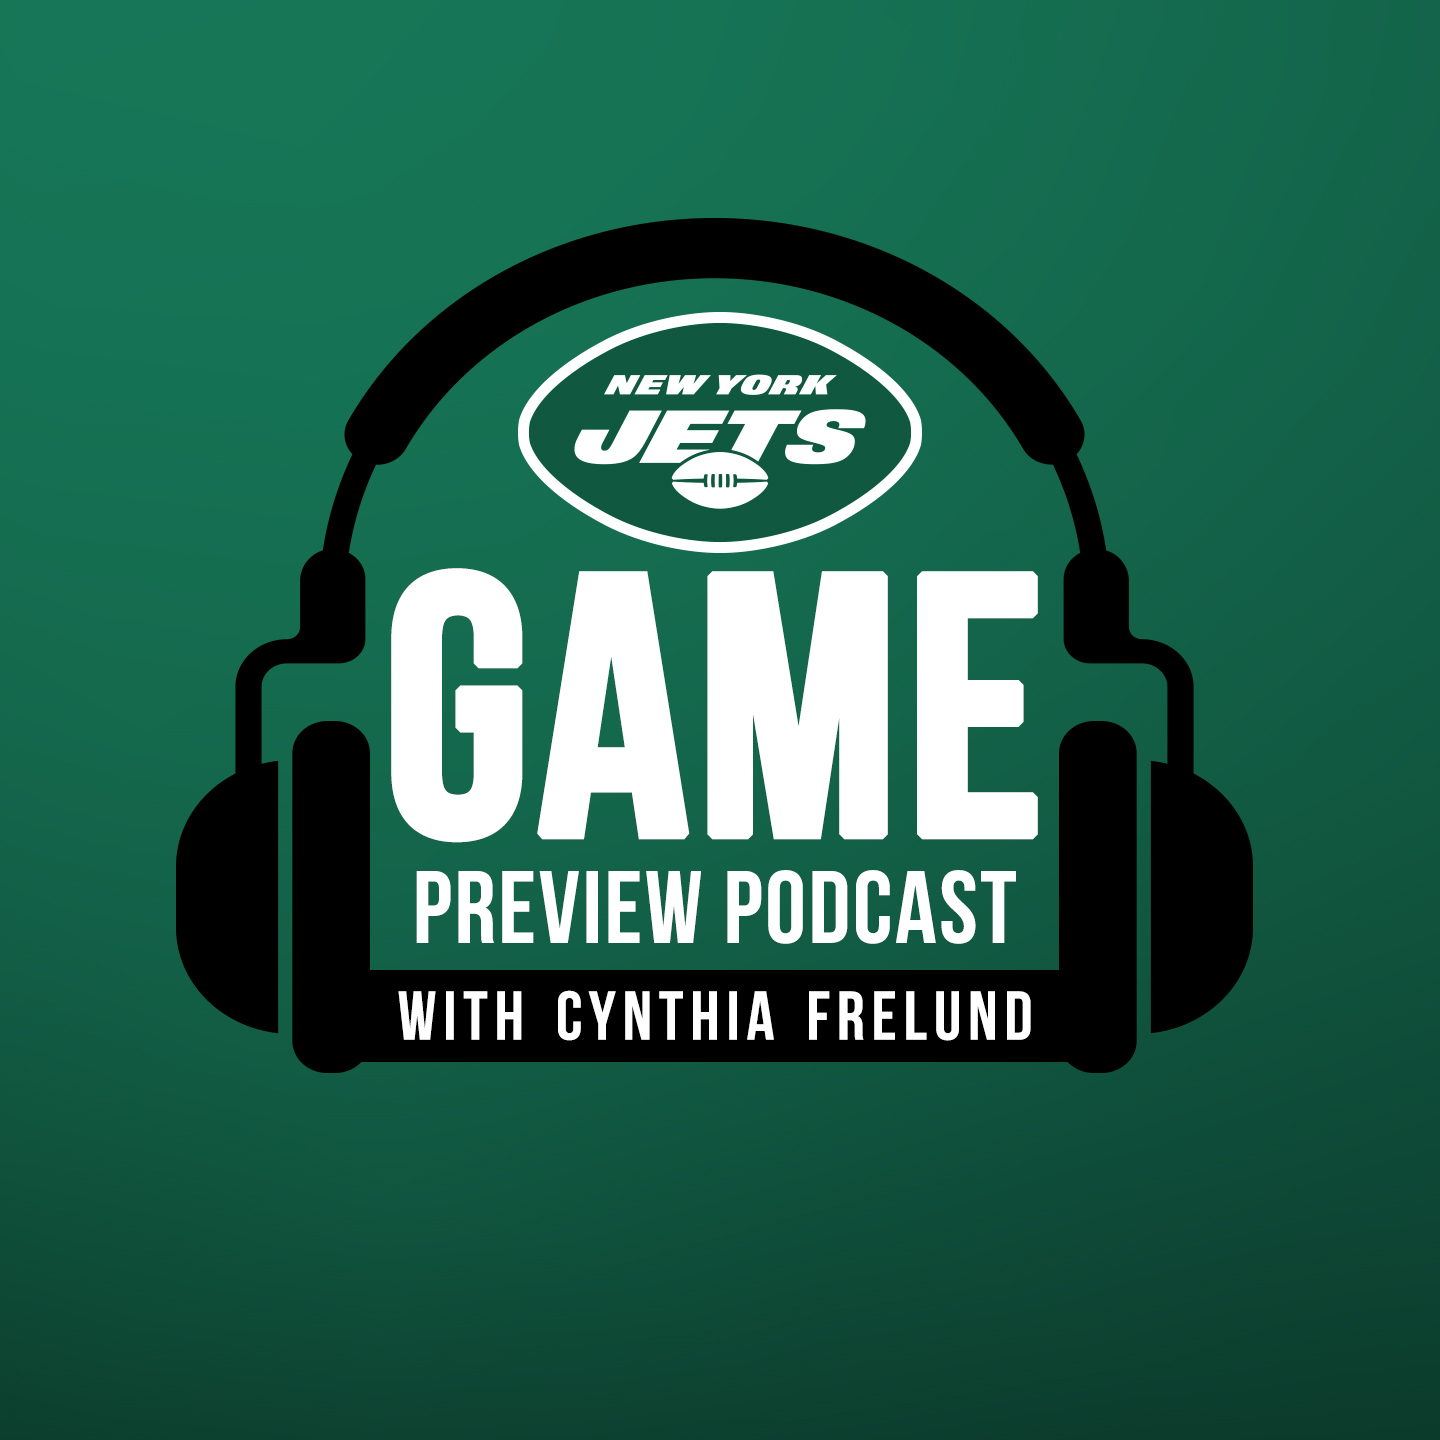 Jets Game Preview Podcast with Cynthia Frelund | Jets vs. Lions (S2E14)